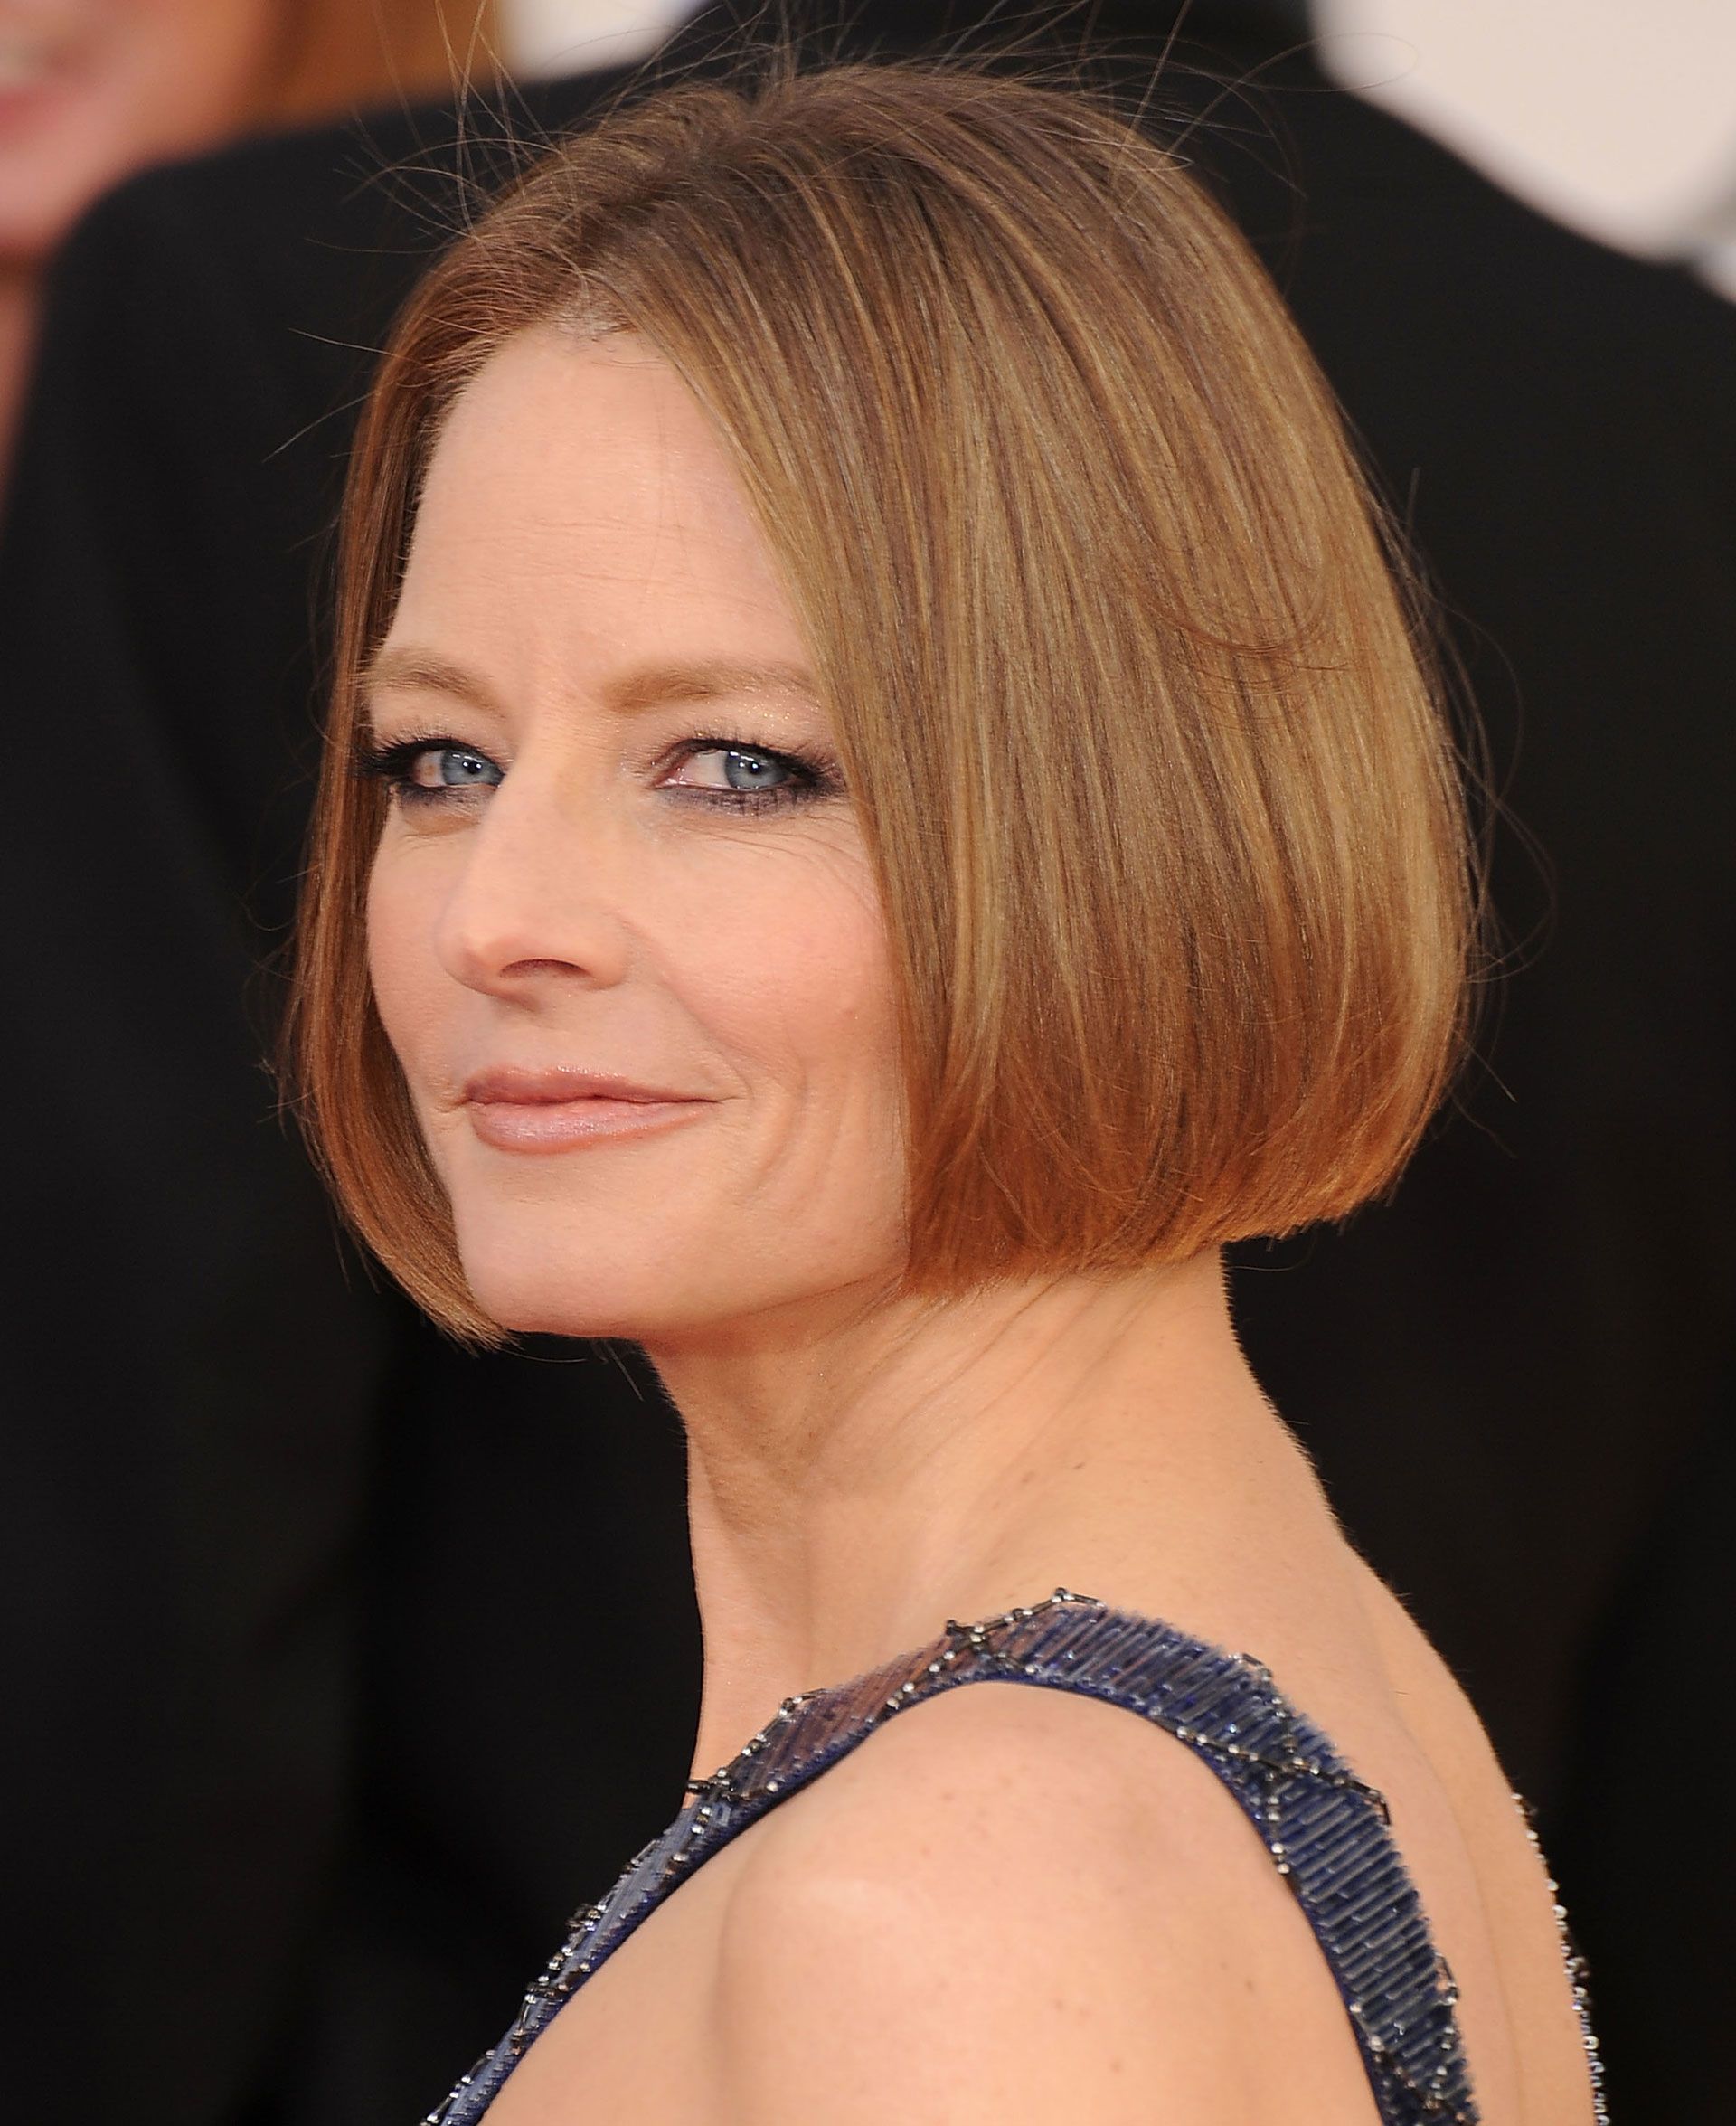 Pictures jodie foster sexy 22 Vintage